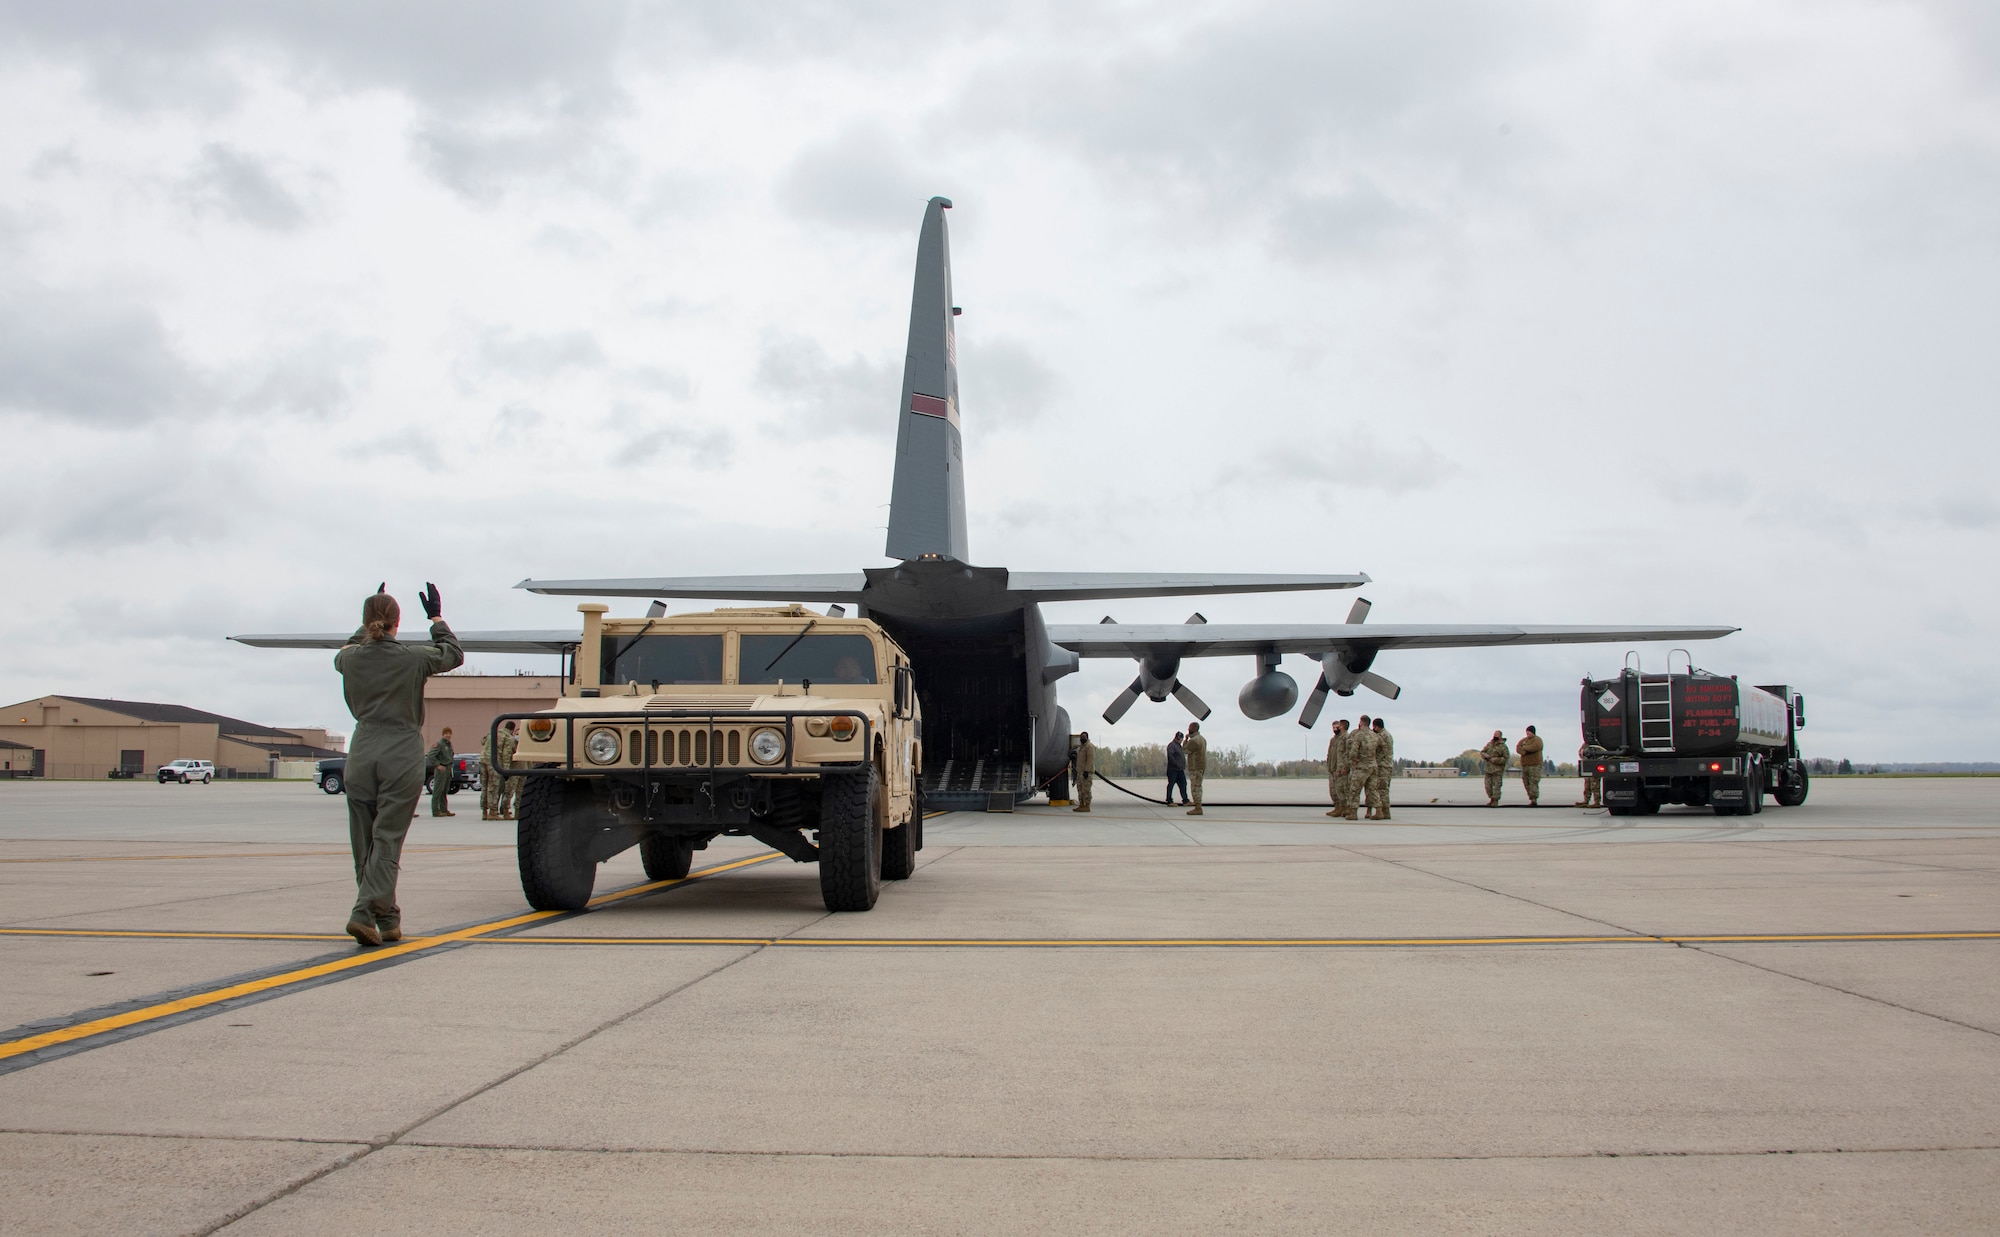 An Airman uses her arms to guide the Humvee driver safely onto the C-130